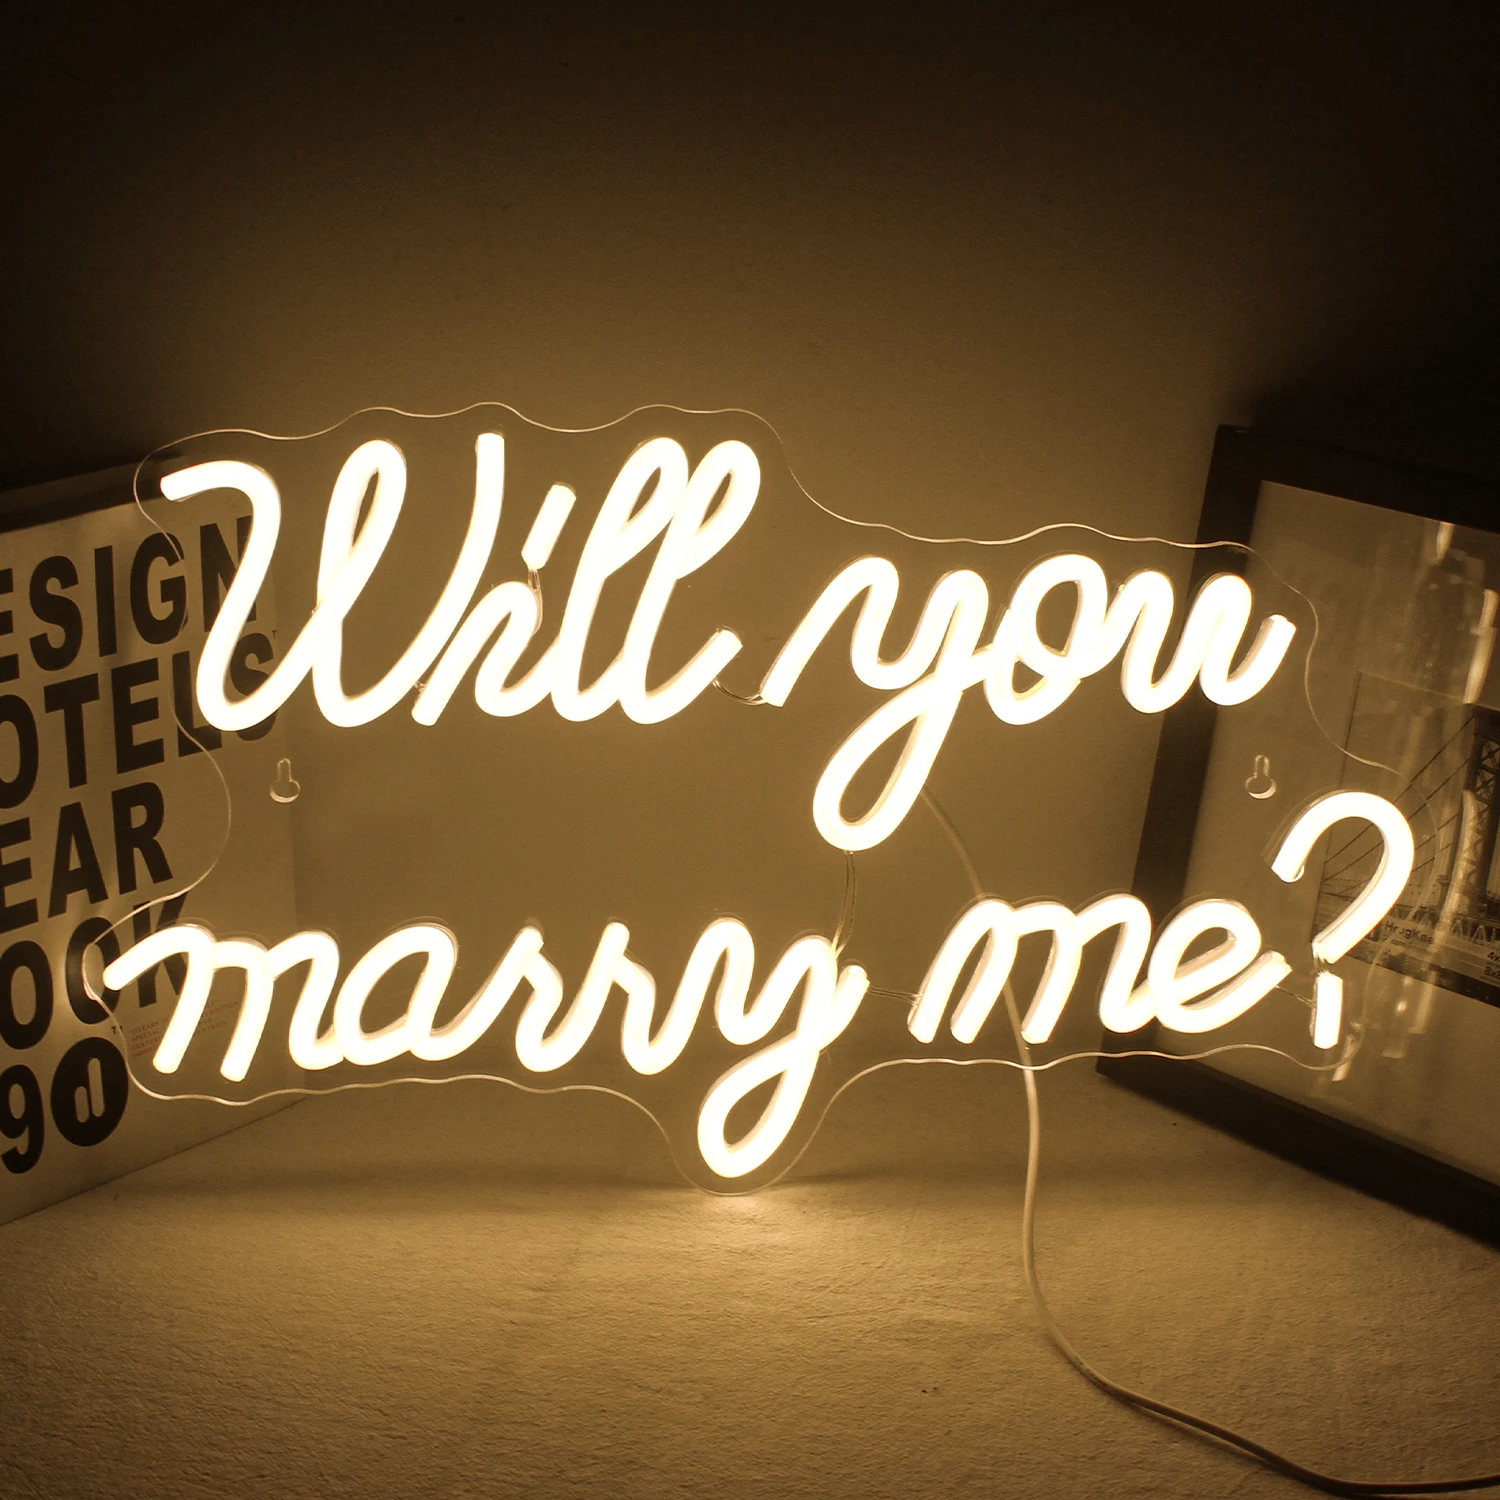 Will You Marry Me Neon Sign LED Light for Romantic Surprise Proposal Wedding Decorations Bedroom Wall Decor Gift Lamp